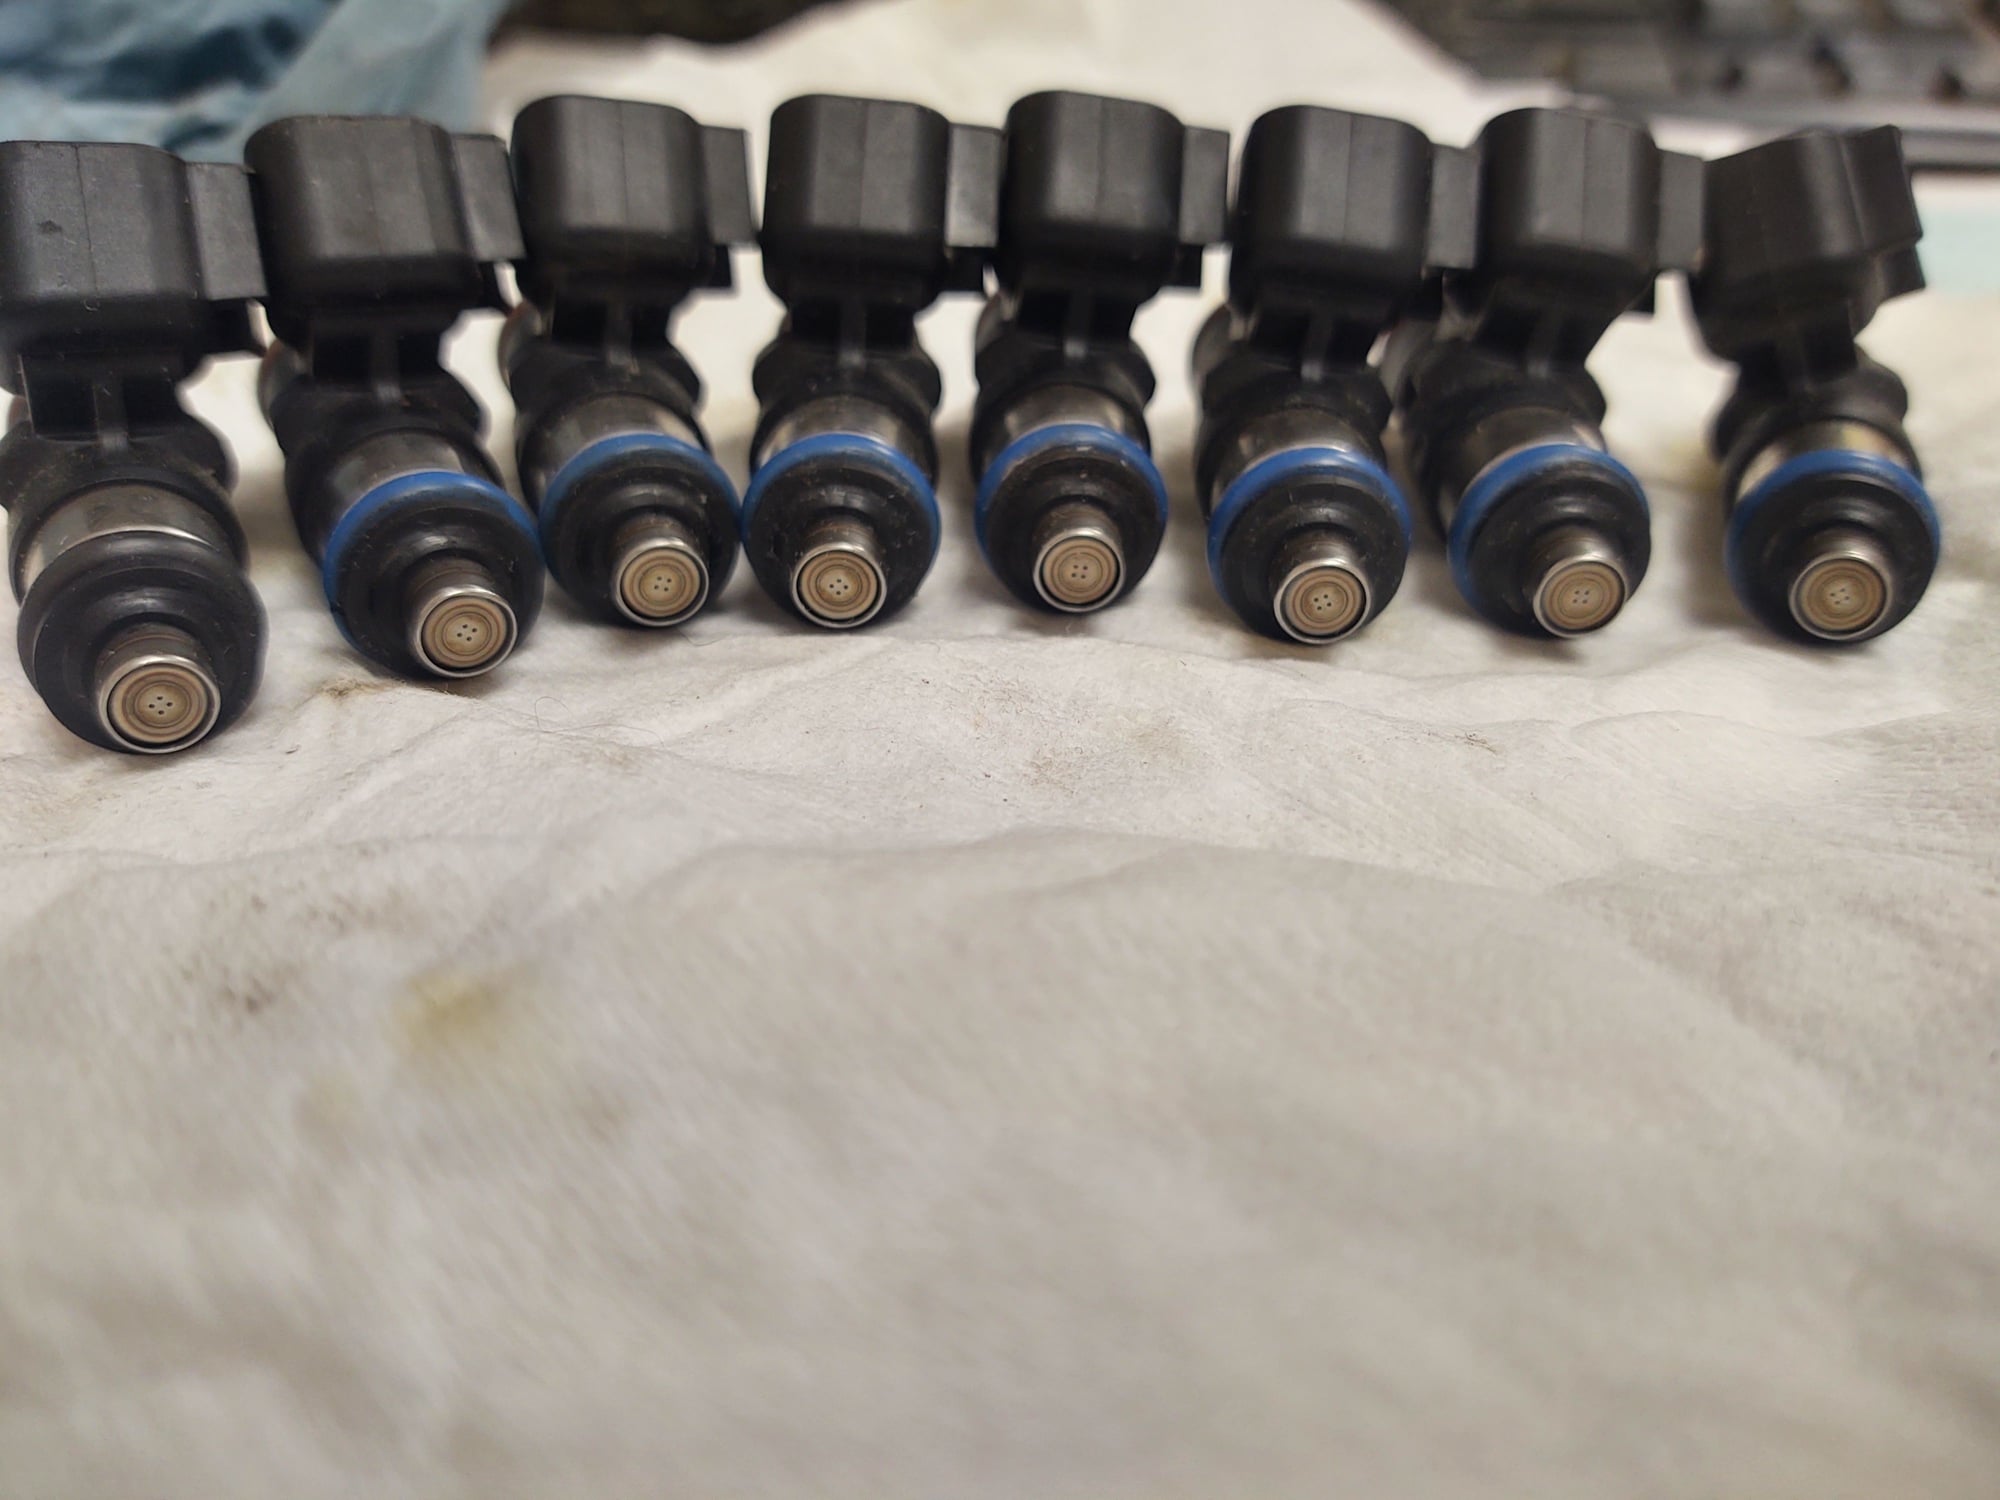 Engine - Intake/Fuel - Fast 80527 injectors - Used - 0  All Models - New Alexandria, PA 15670, United States